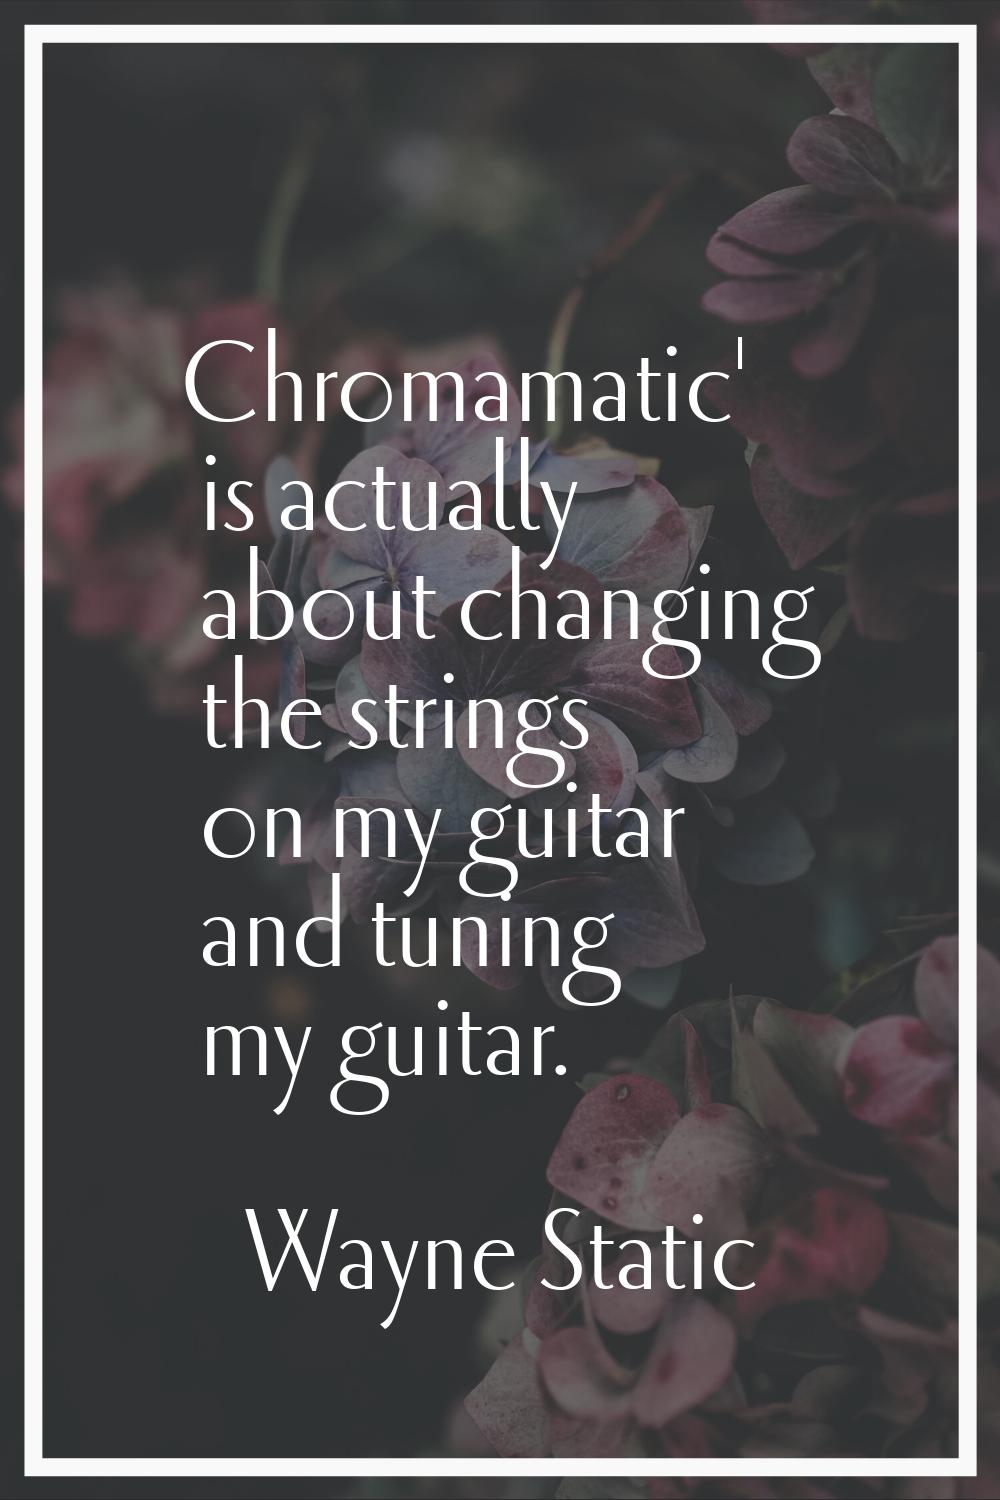 Chromamatic' is actually about changing the strings on my guitar and tuning my guitar.